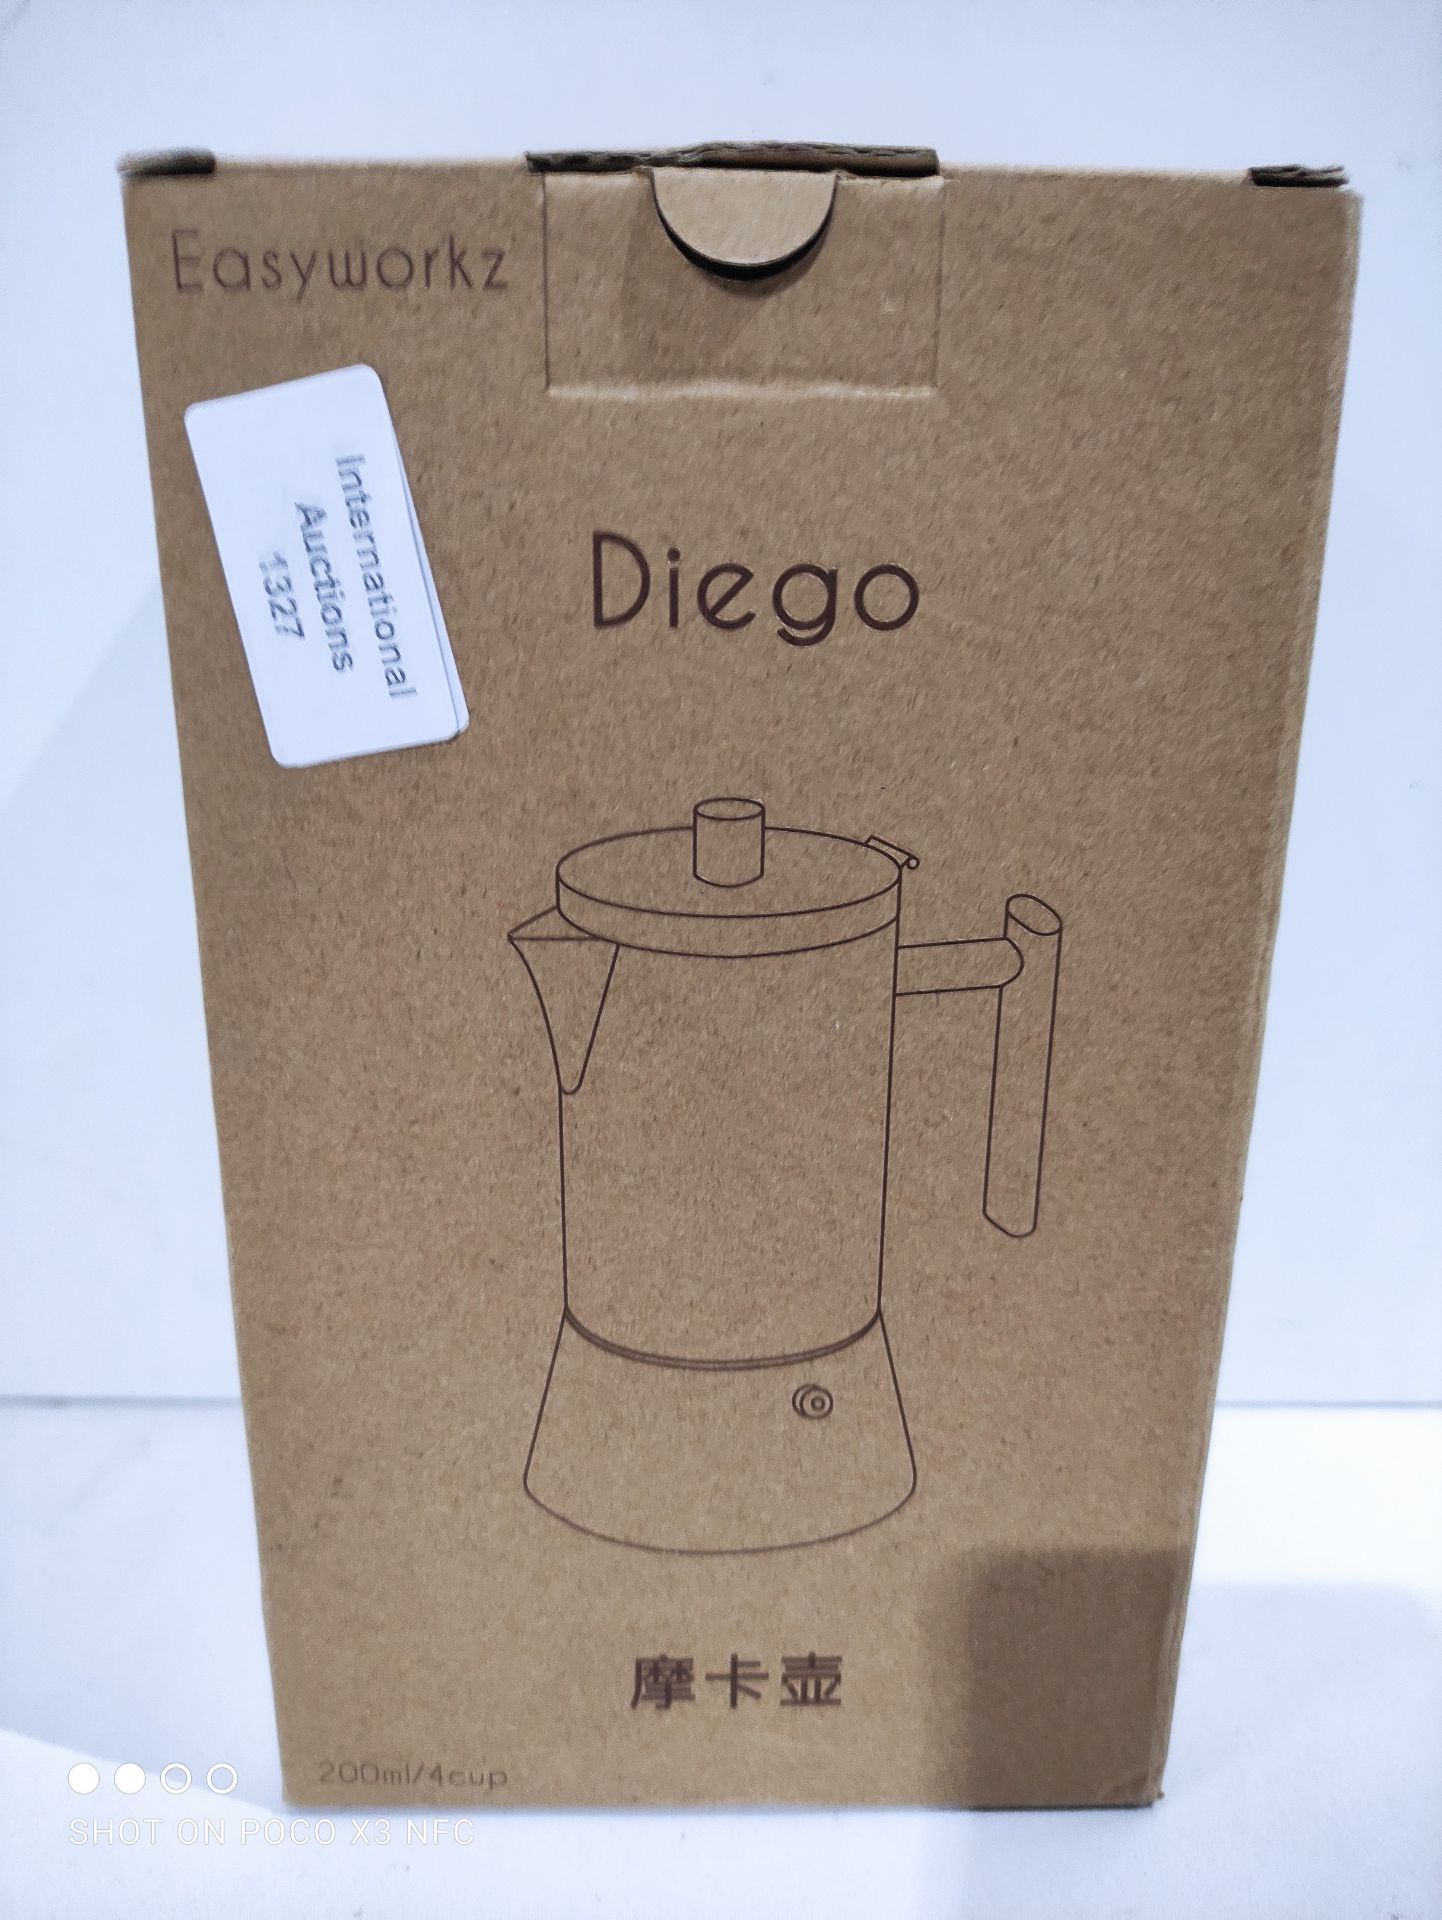 RRP £36.98 Easyworkz Diego Stovetop Espresso Maker Stainless Steel - Image 2 of 2